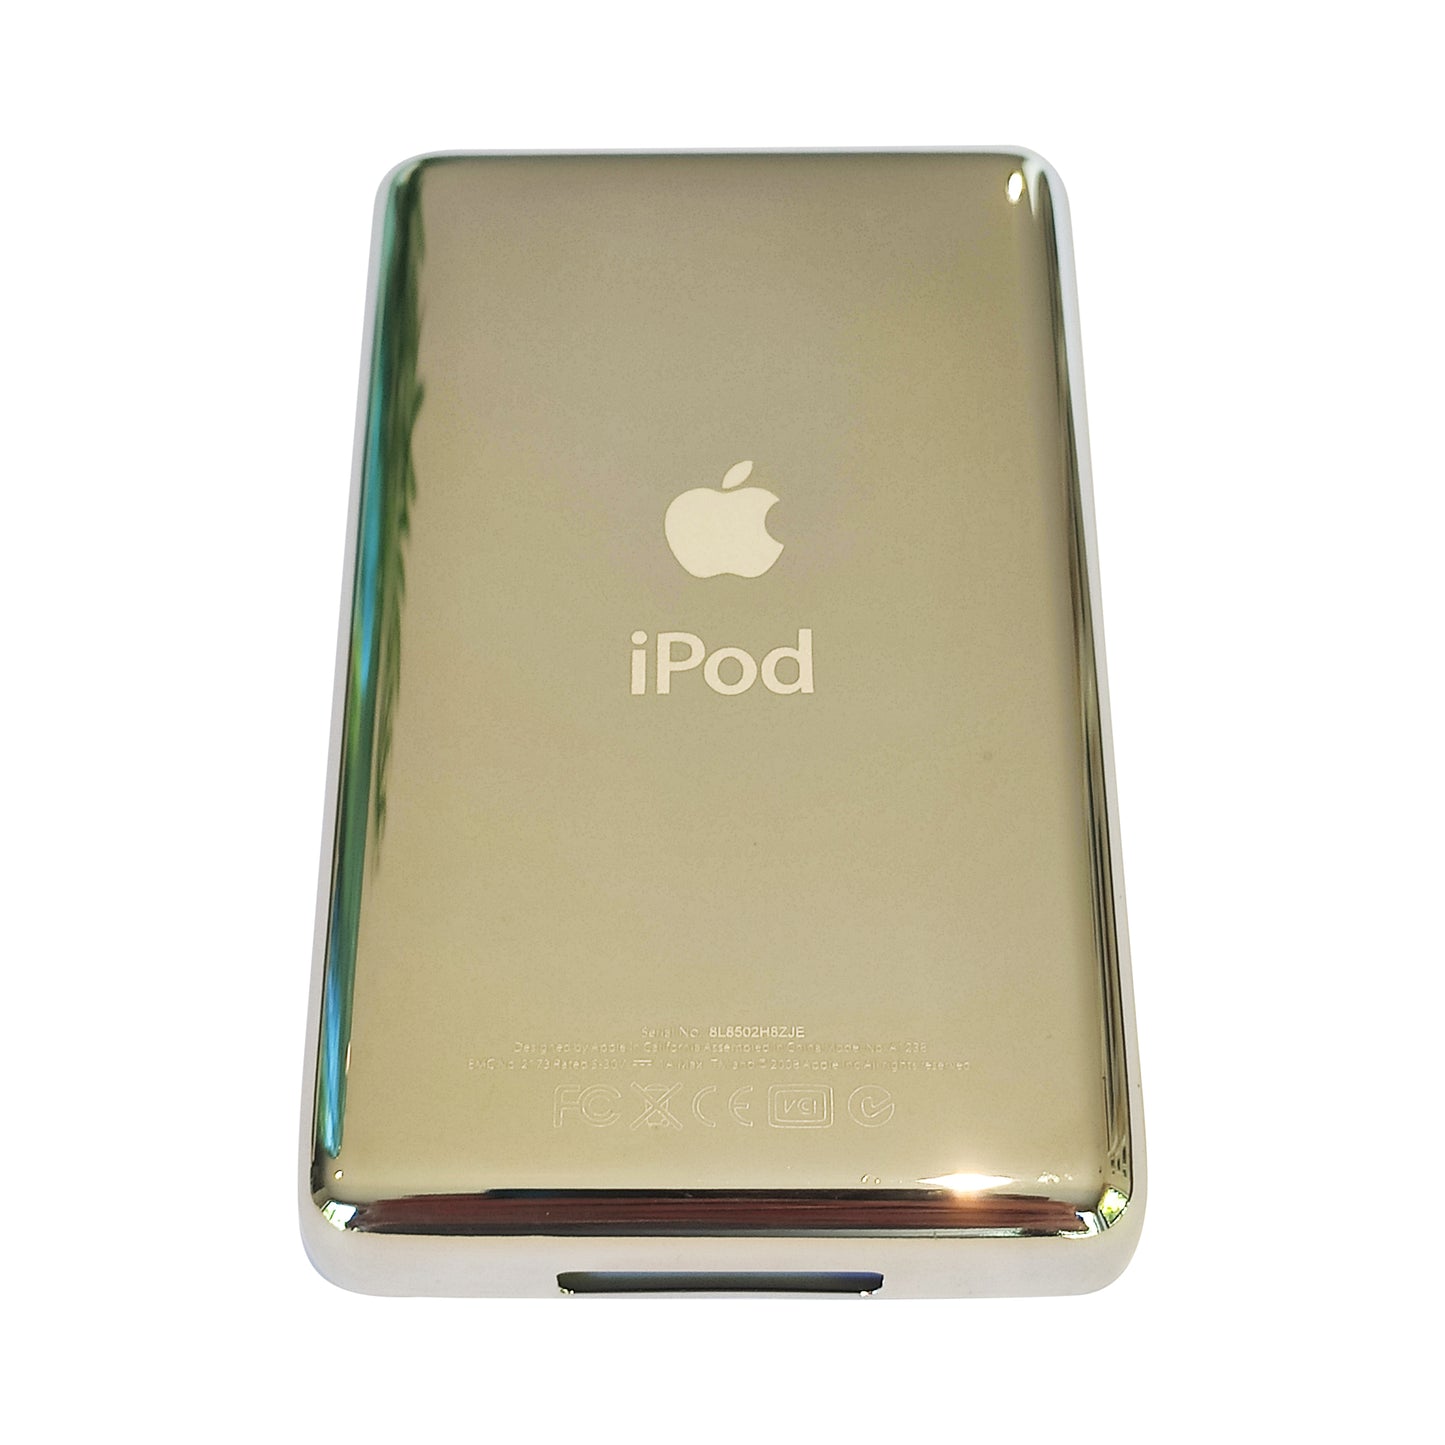 iPod Video / Classic Thick Rear Cover (No Storage Engraved)